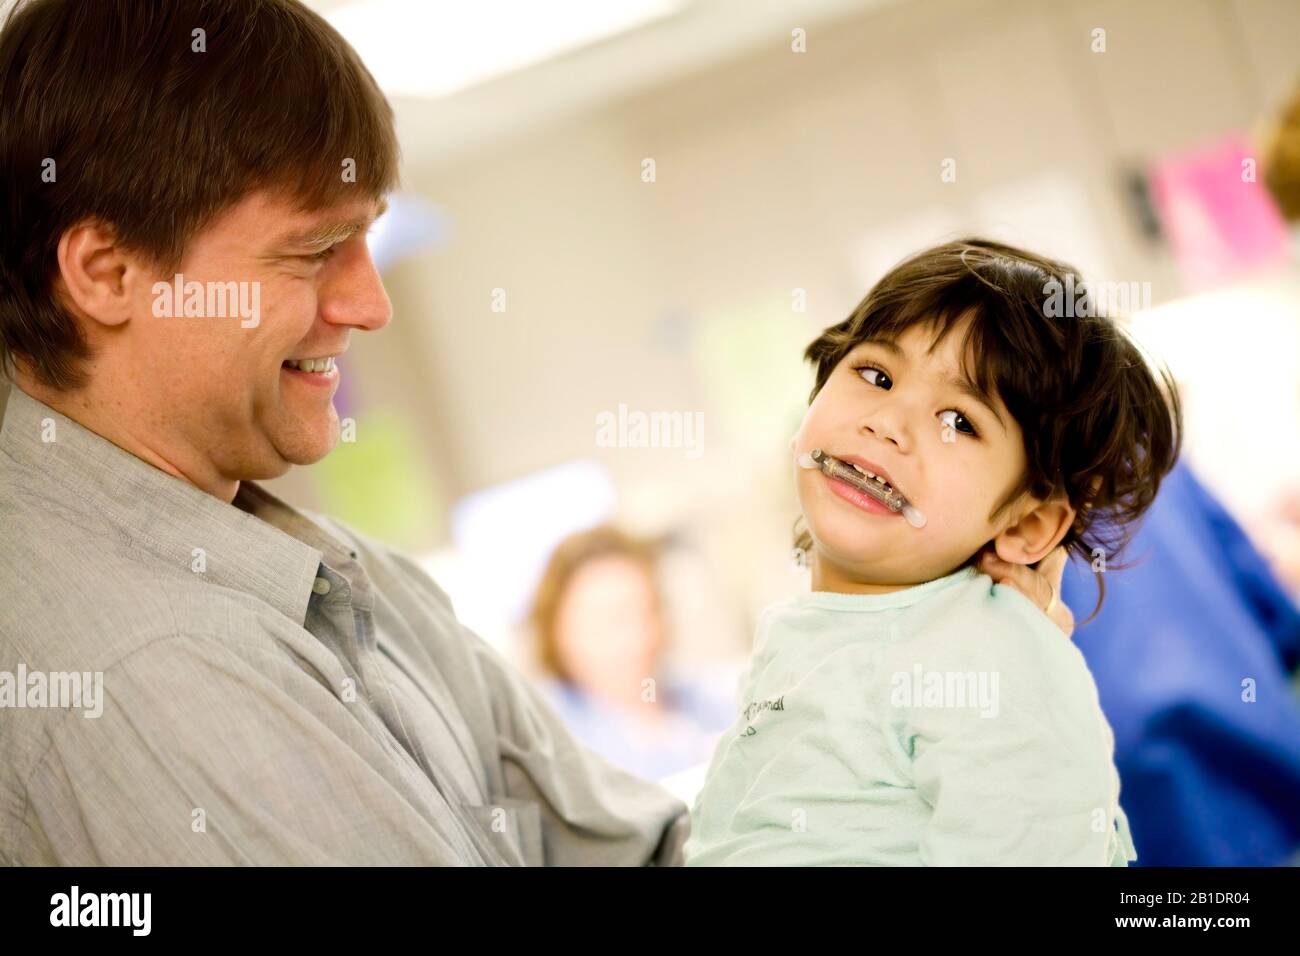 Caucasian father holding sick disabled little boy in surgical gown in hospital before surgery. Child has medical mouth device in place. Stock Photo